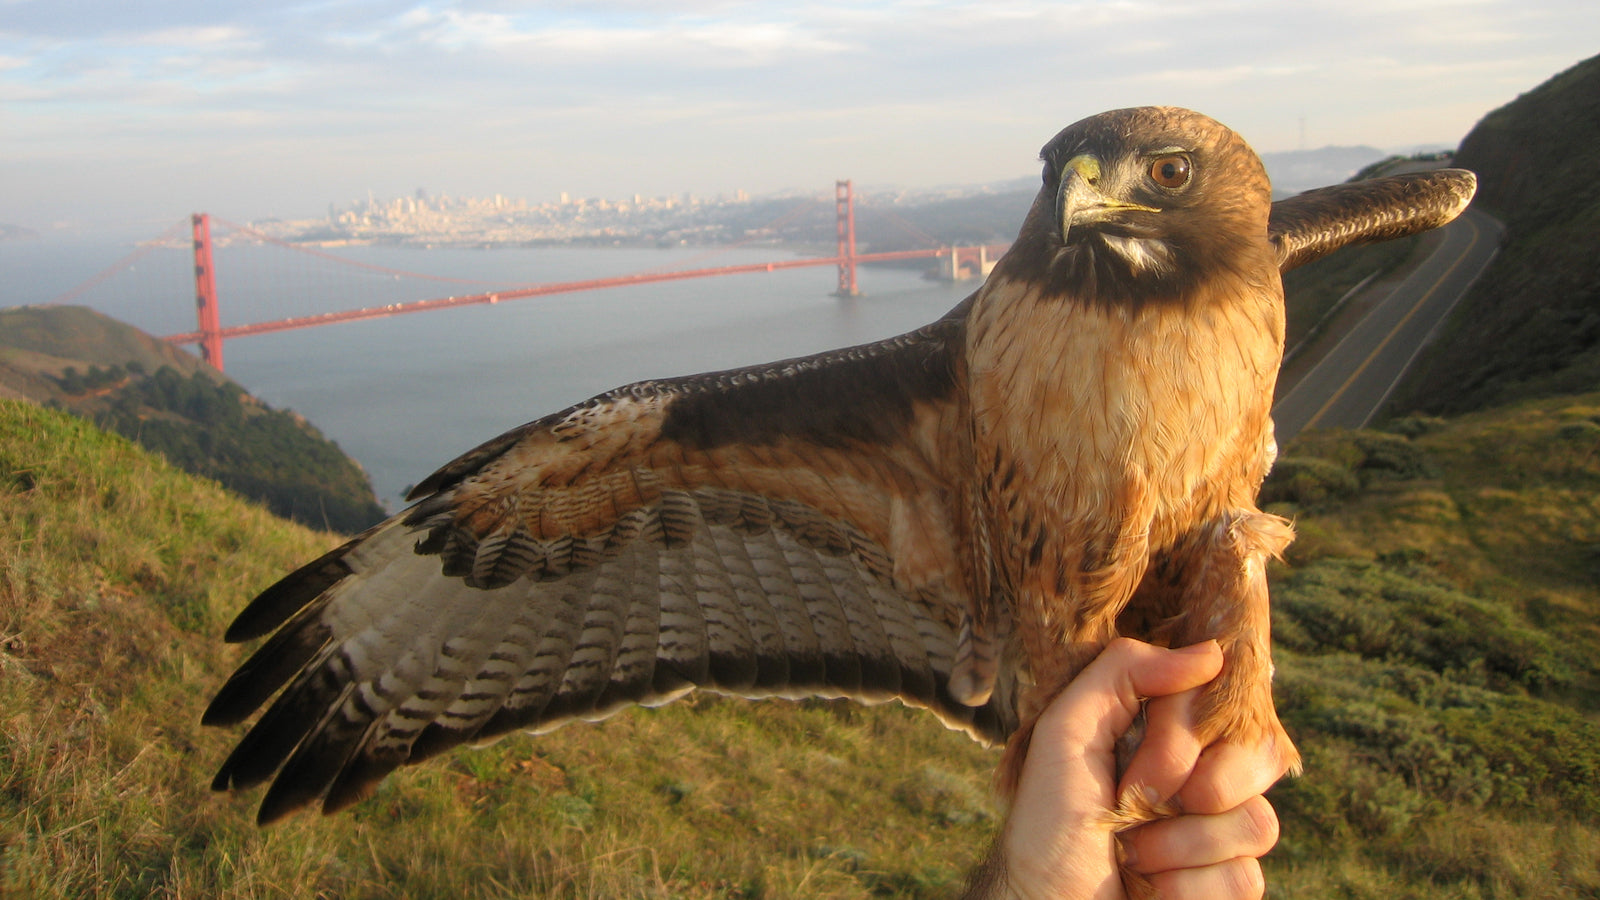 Raptor being banded at the Marin Headlands, with a dramatic view of San Francisco and the Golden Gate Bridge in the background.